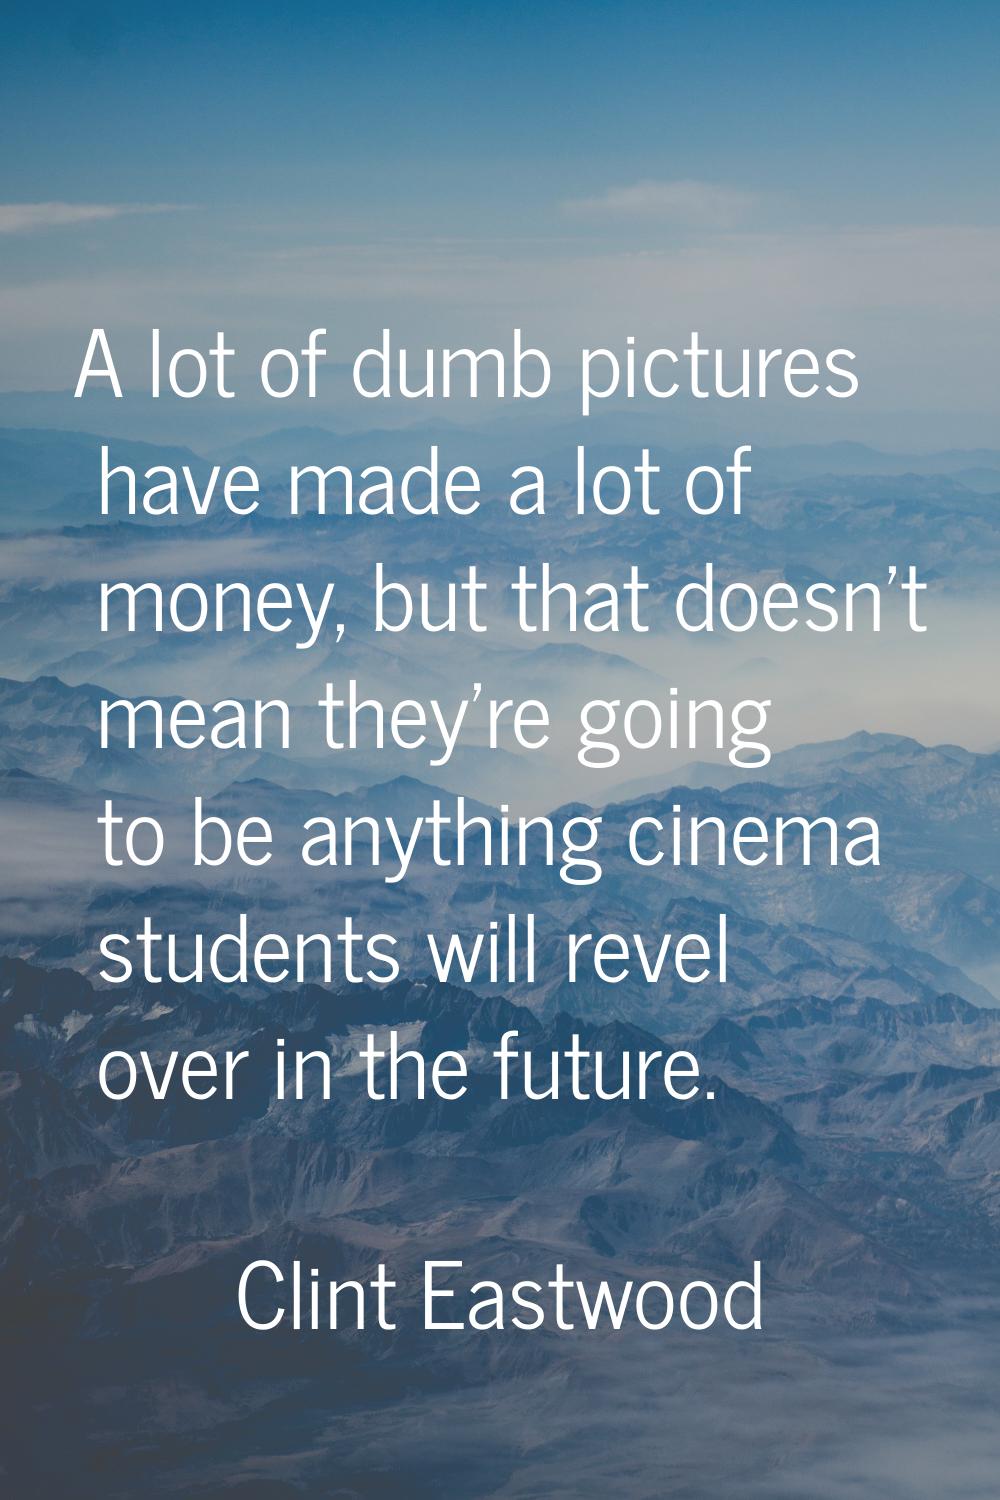 A lot of dumb pictures have made a lot of money, but that doesn't mean they're going to be anything